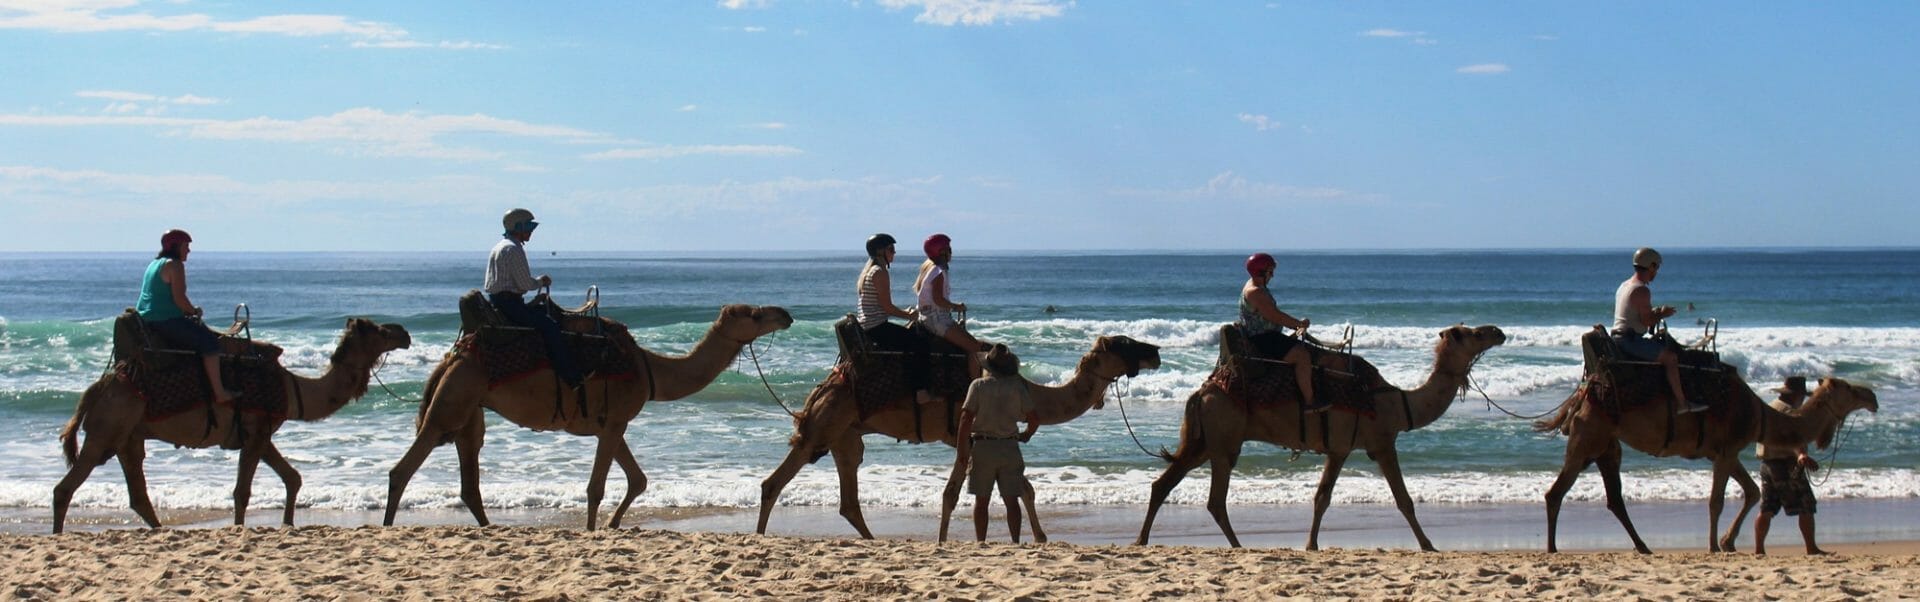 Camels by the Sea, Port Macquarie